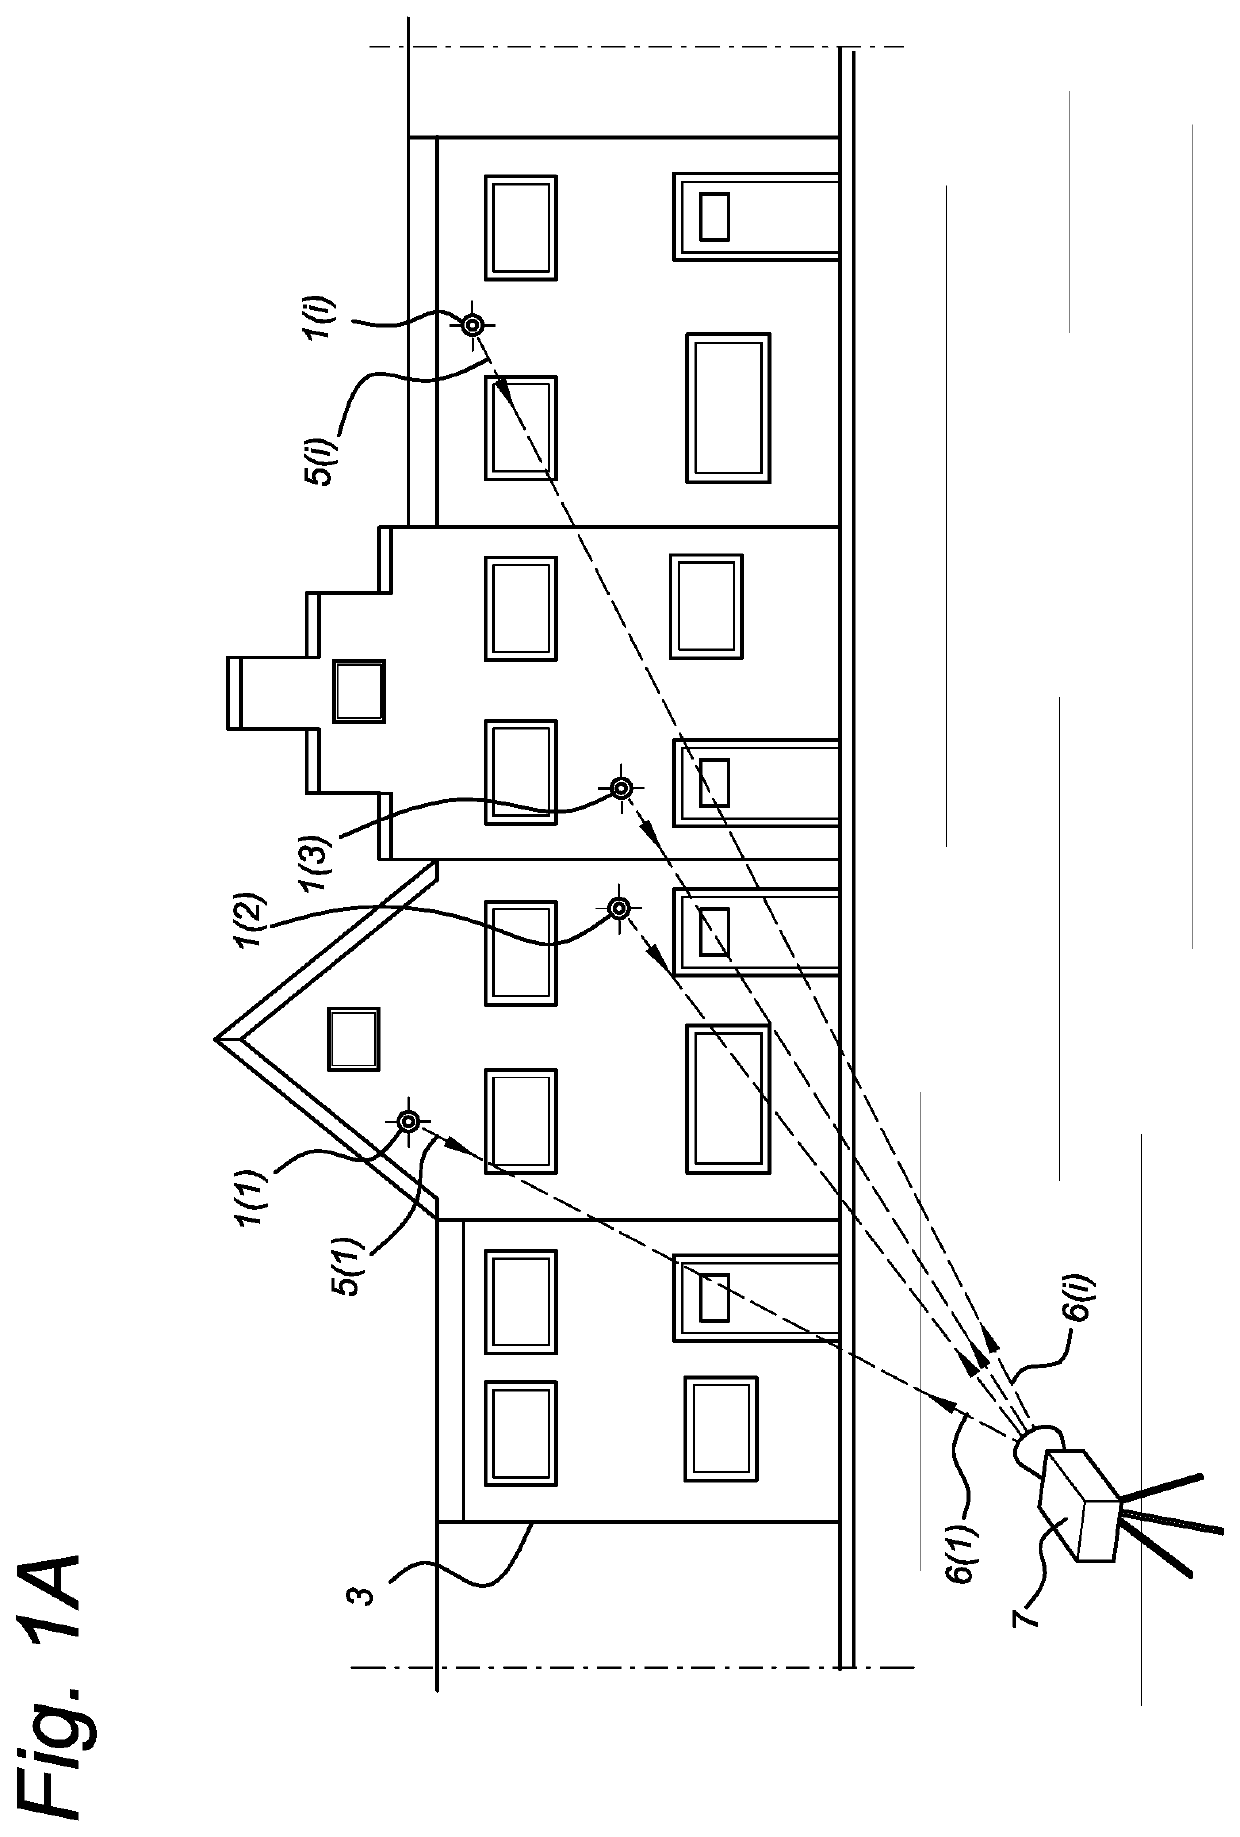 Surveying instrument for and surveying method of surveying reference points